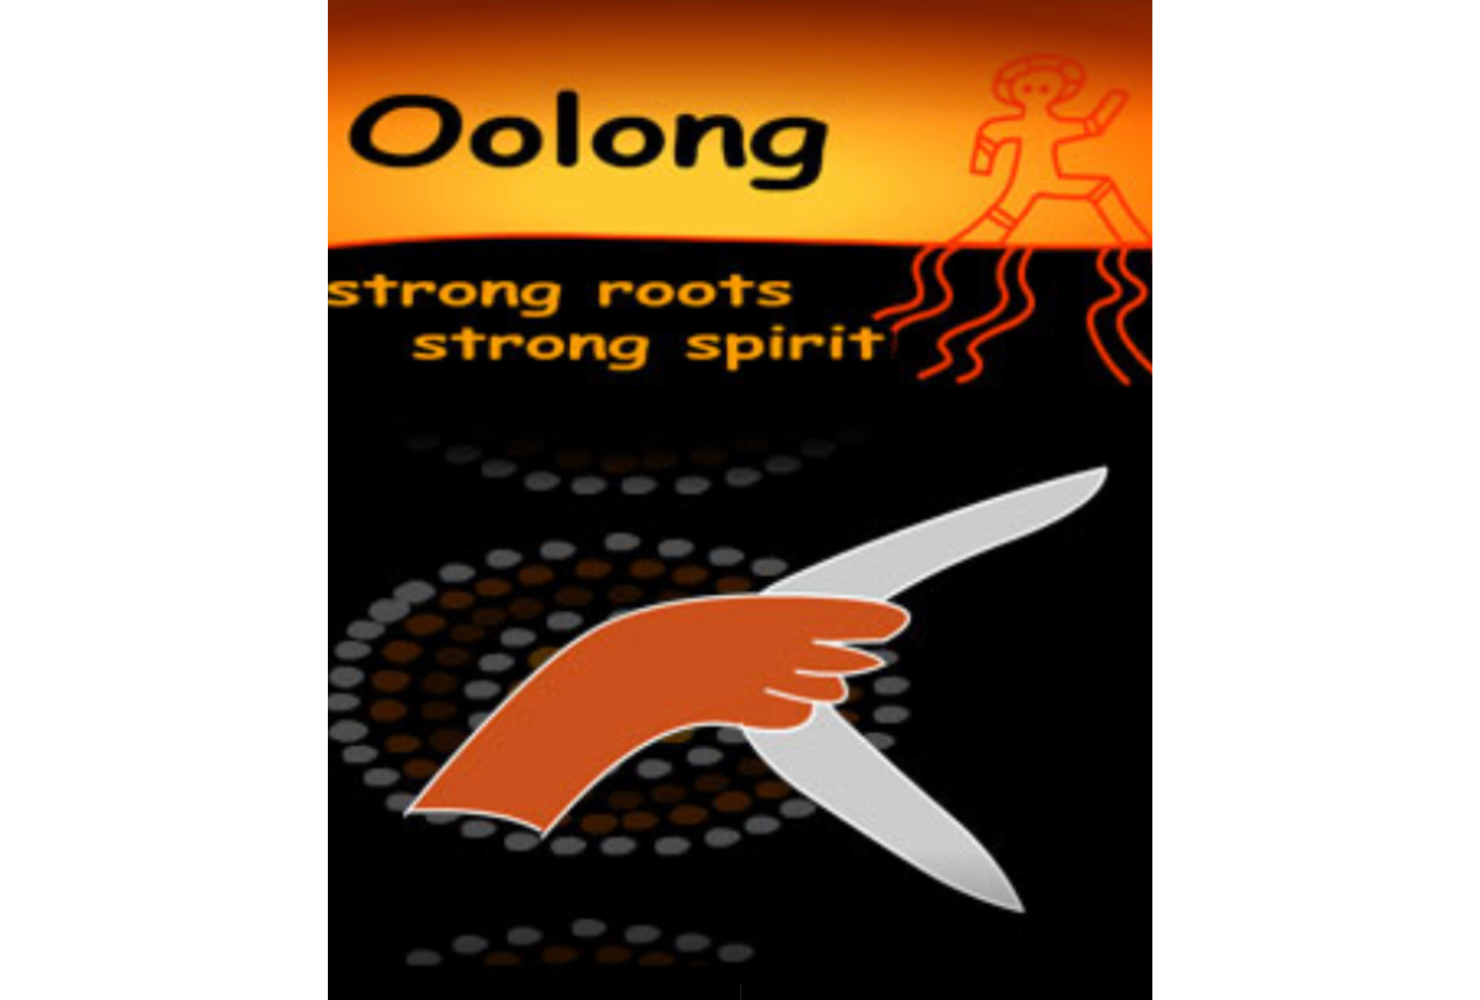 Oolong house logo which shows a boomerang held buy a red hand.